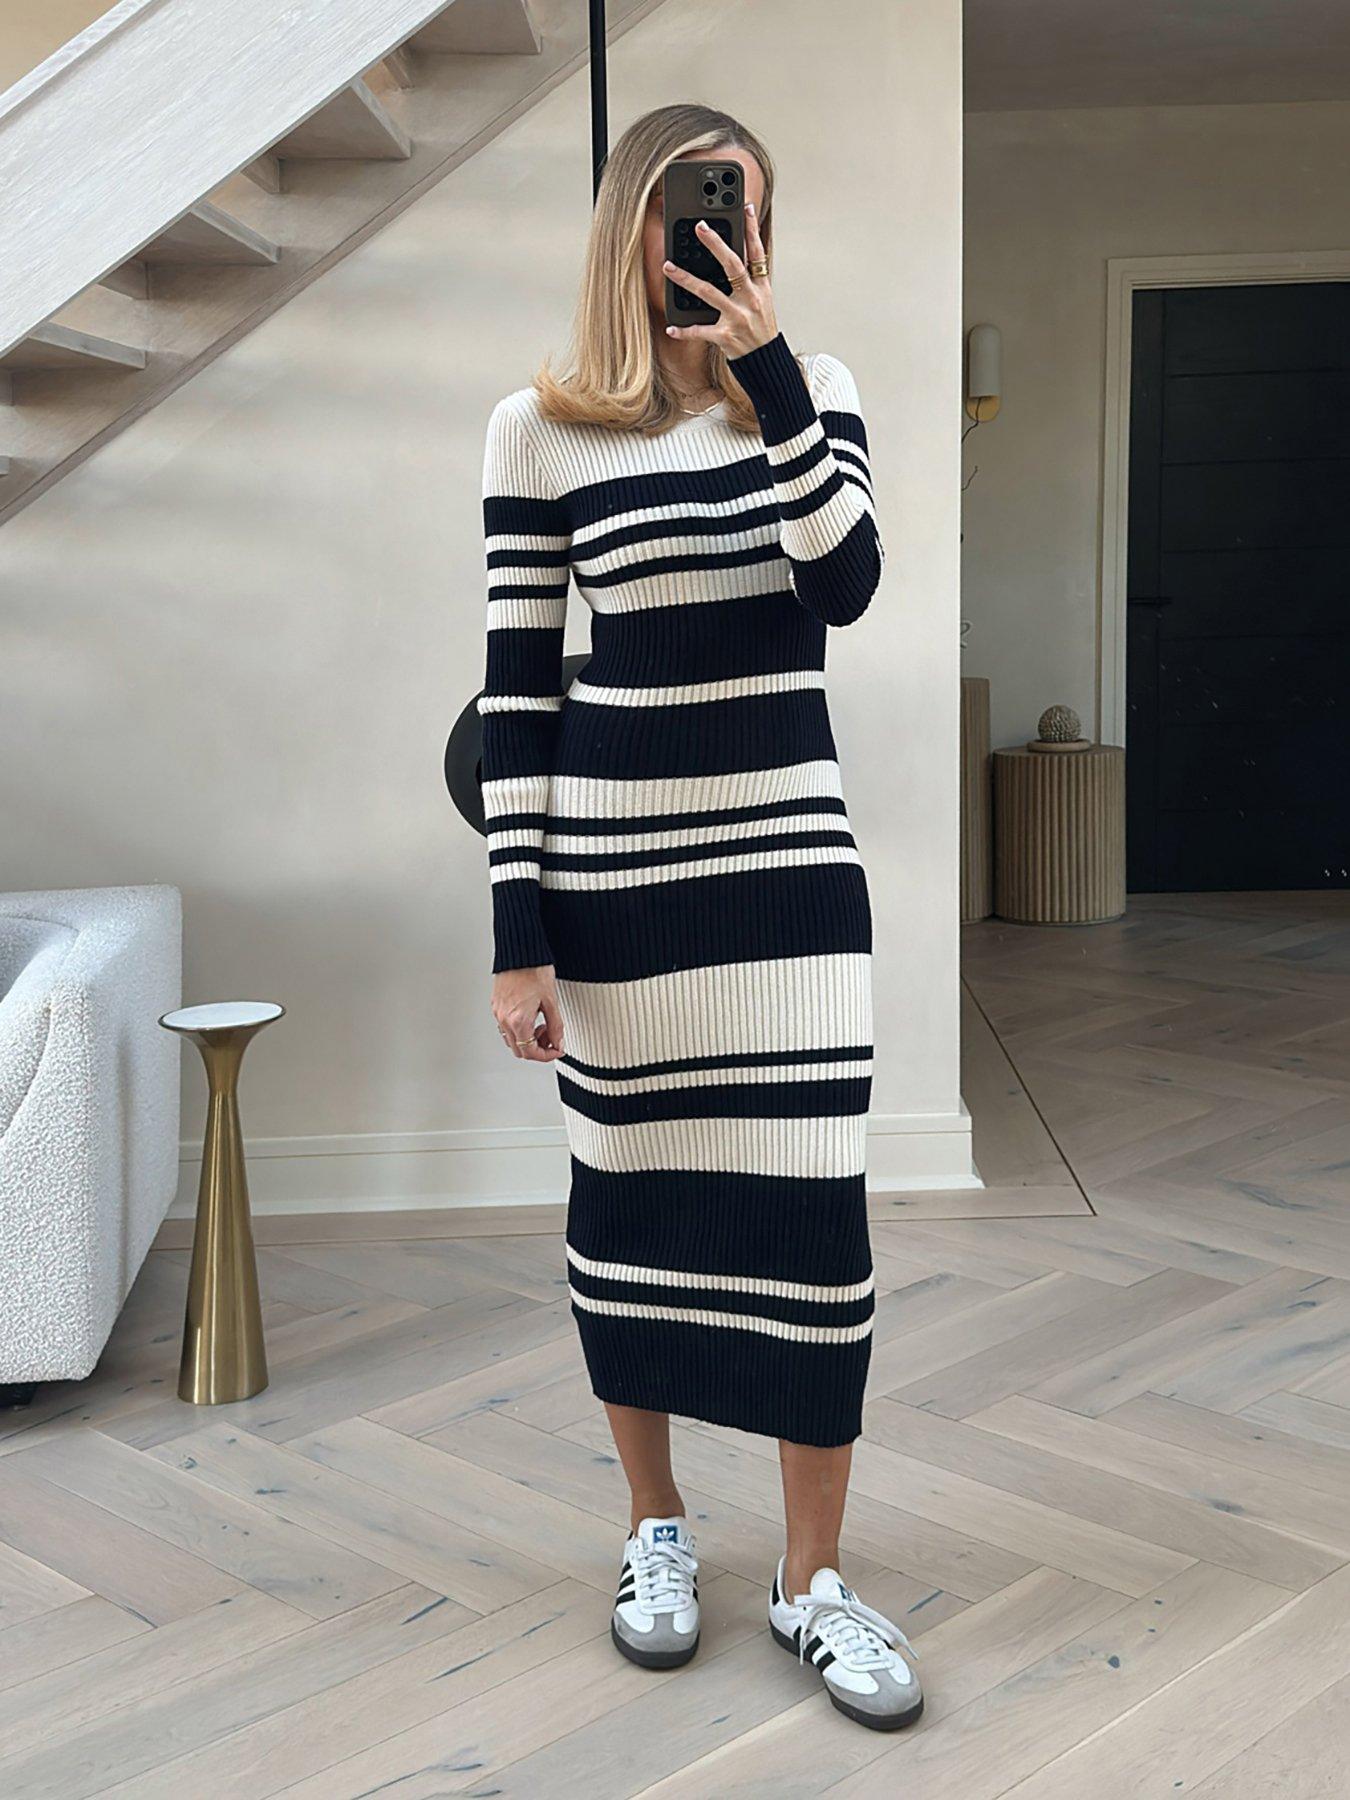 Long Sleeve, In the style, Dresses, Women